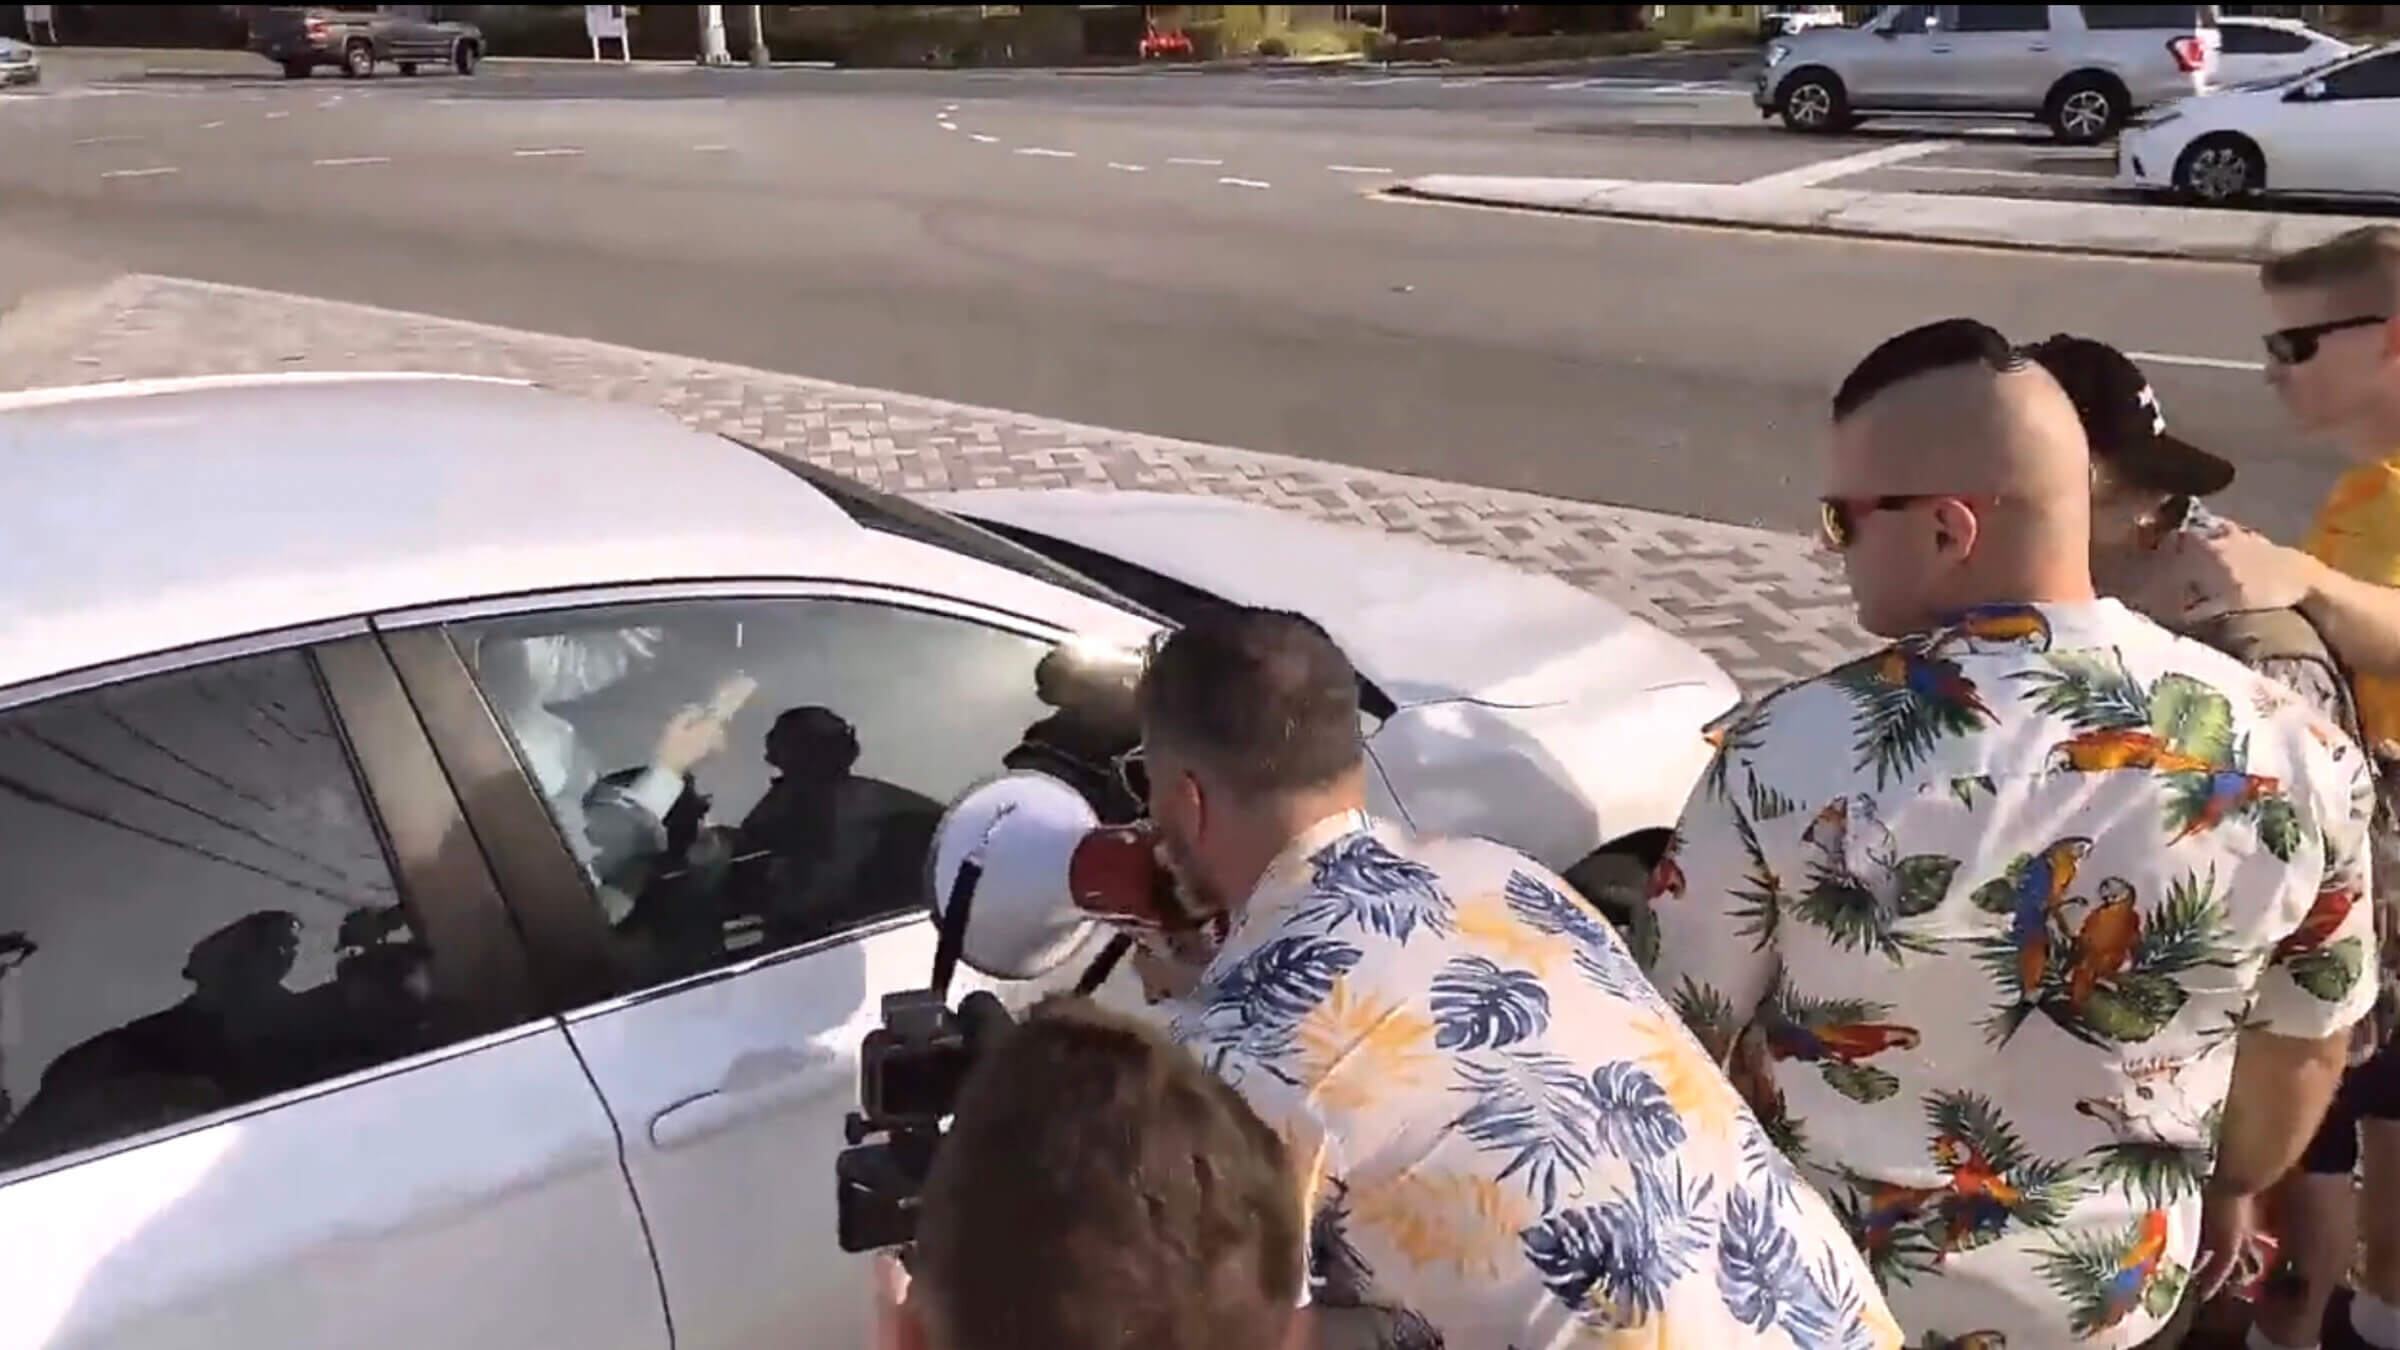 Members of the Goyim Defense League including Jon Minadeo, holding the megaphone, harass a Jewish man leaving Chabad of South Orlando on Friday.